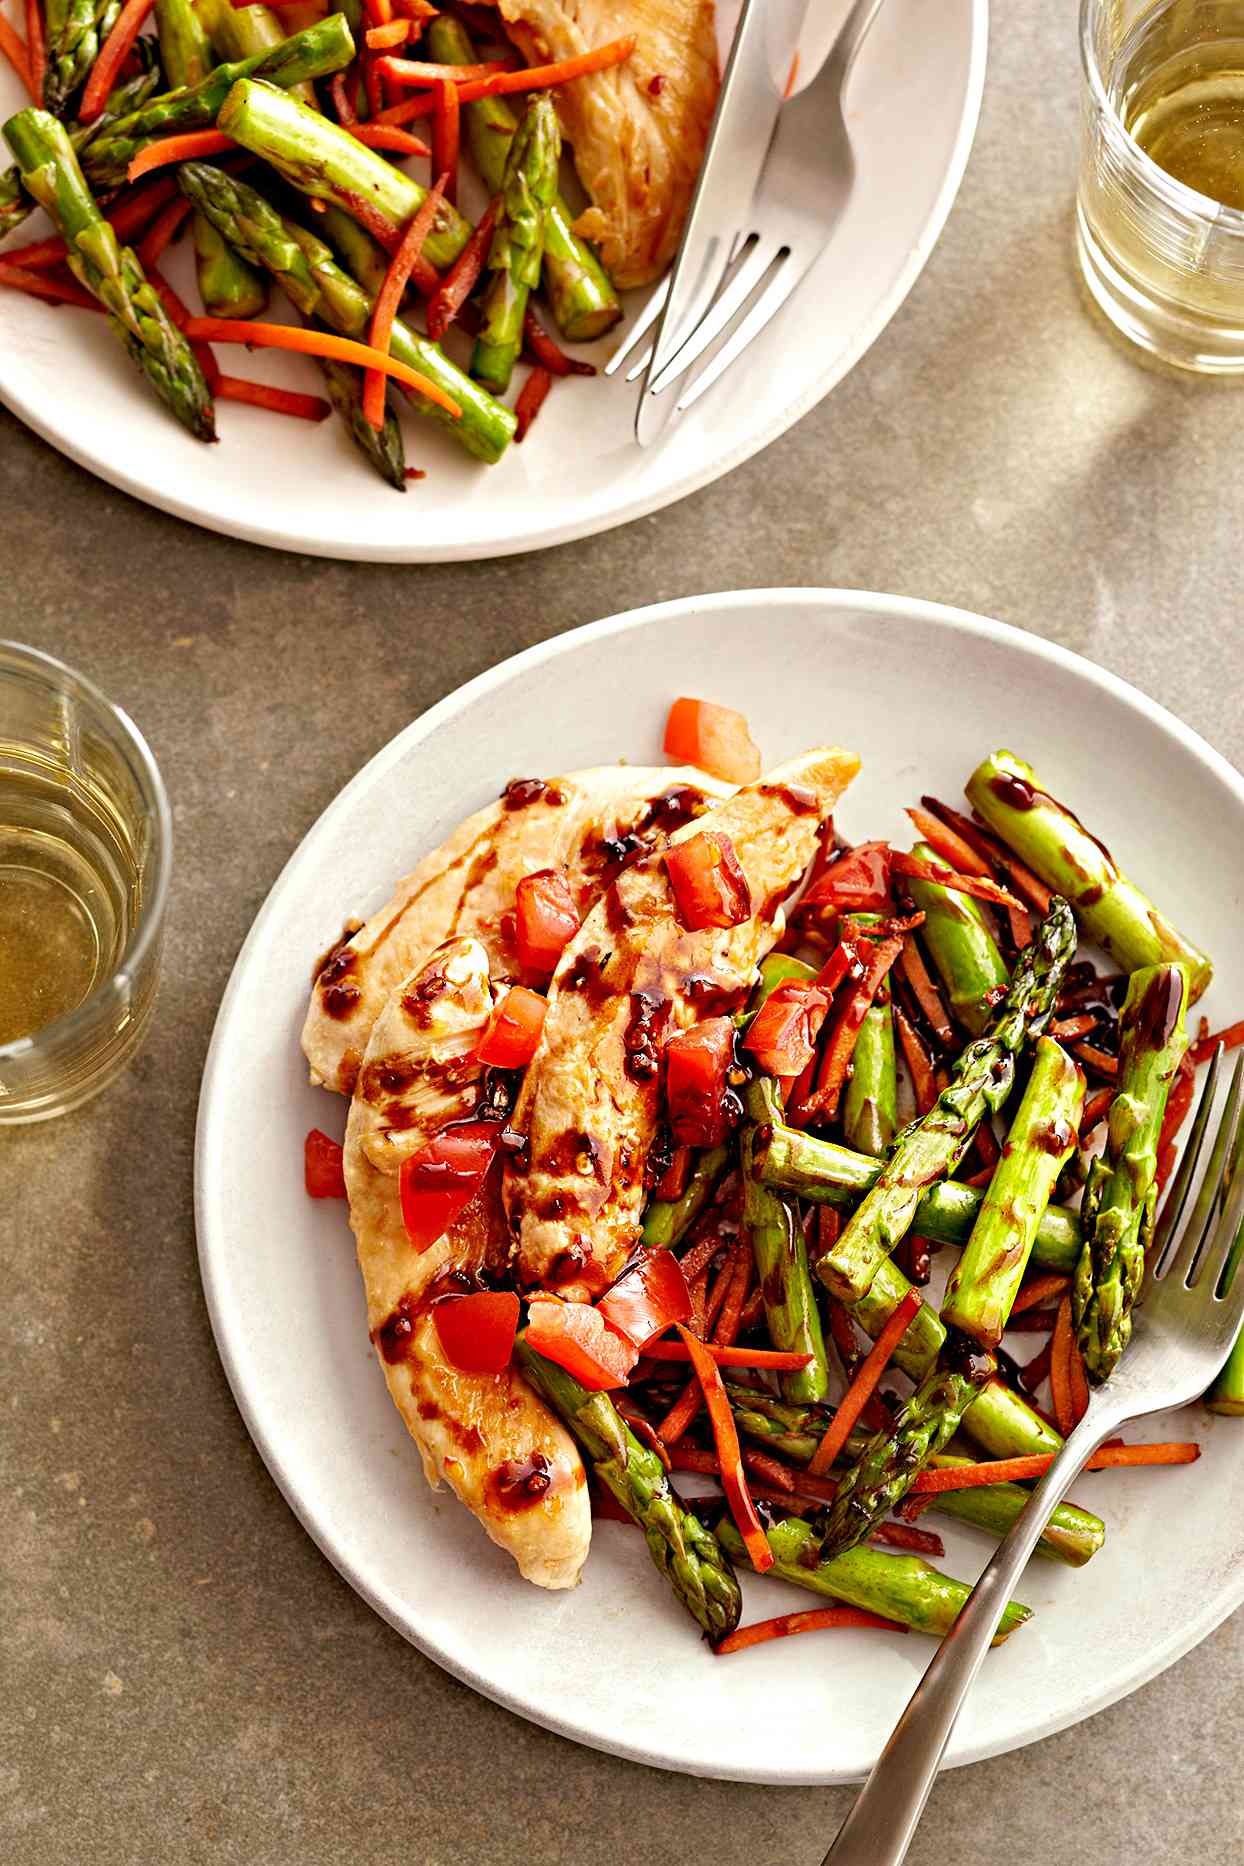 Balsamic Chicken and Vegetables